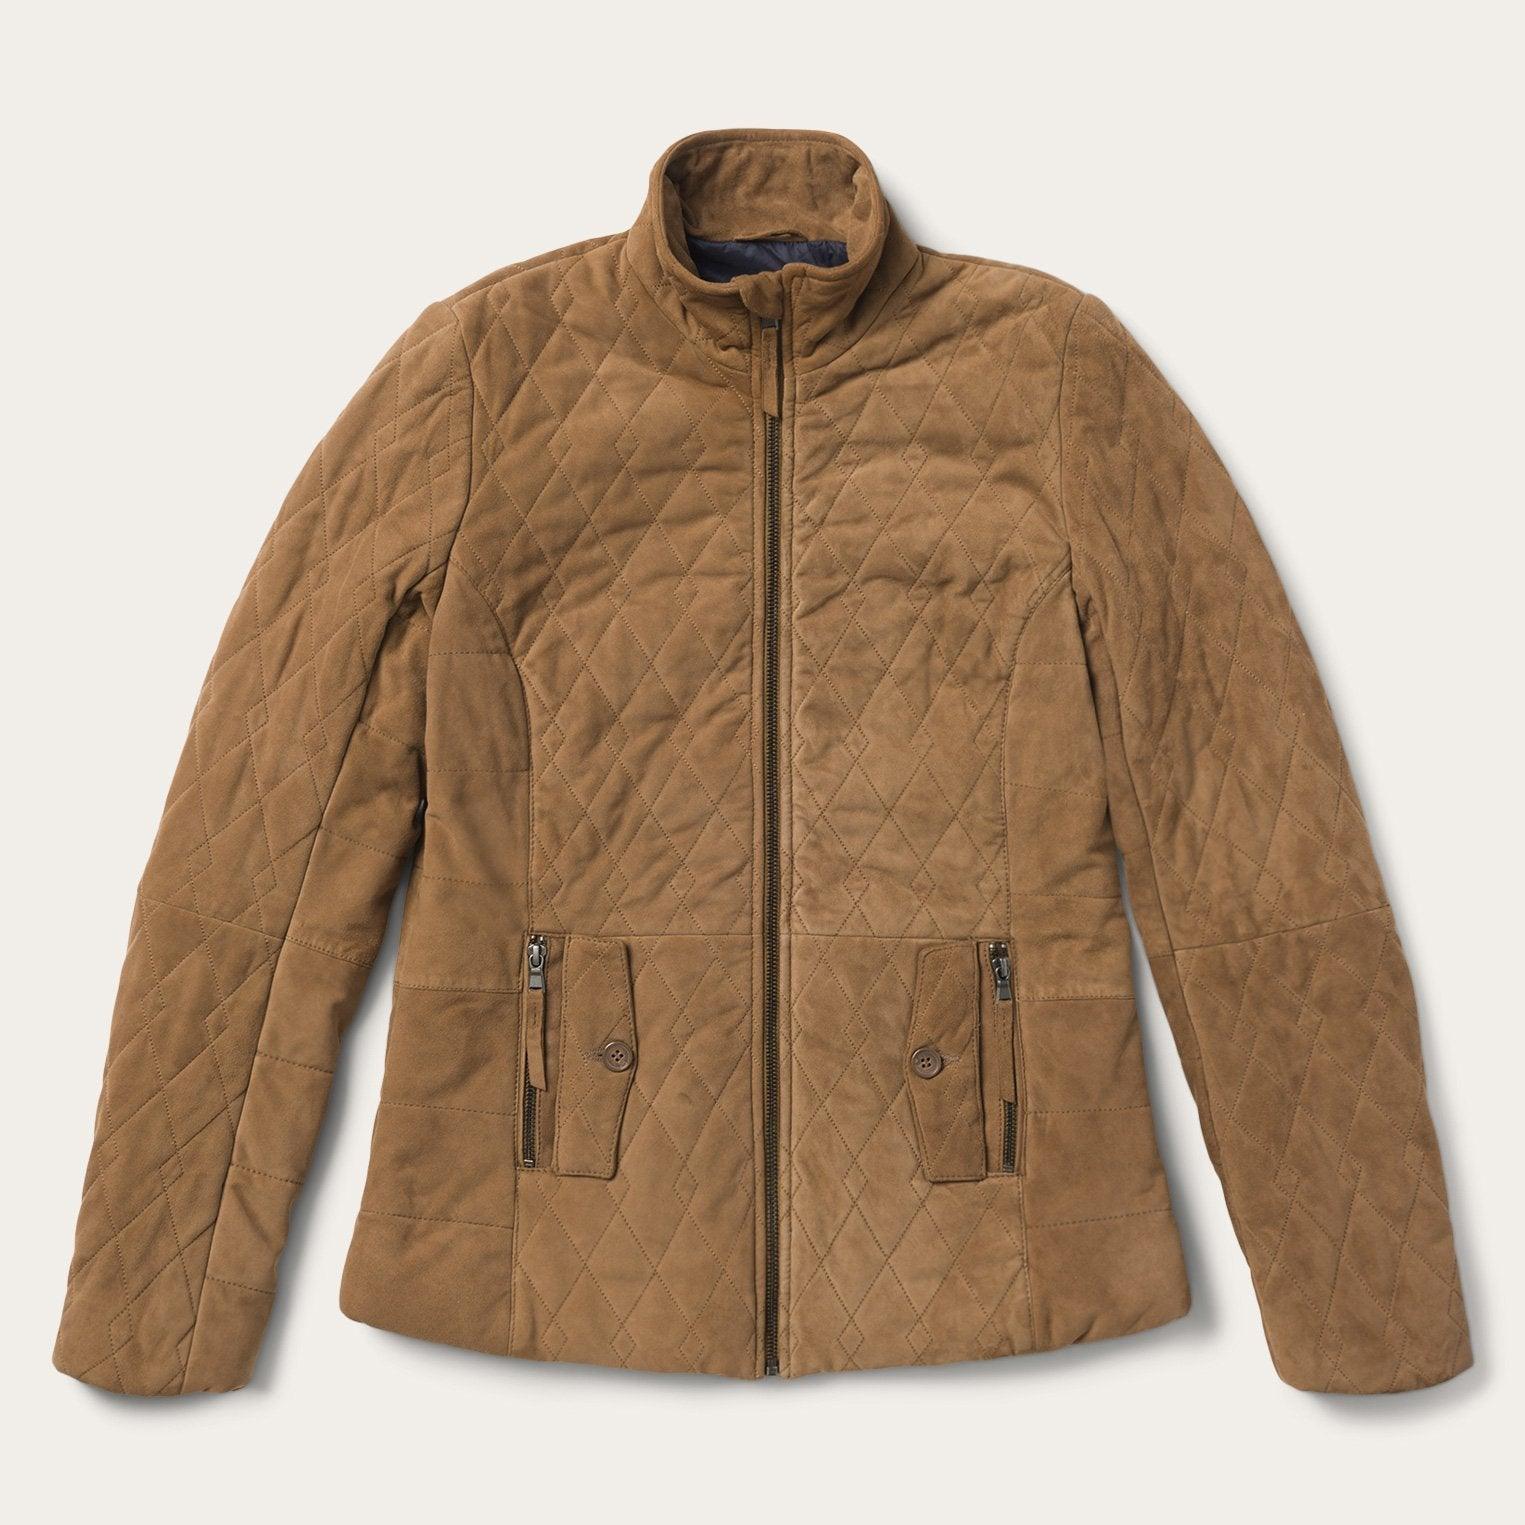 Stetson Diamond Quilted Suede Jacket